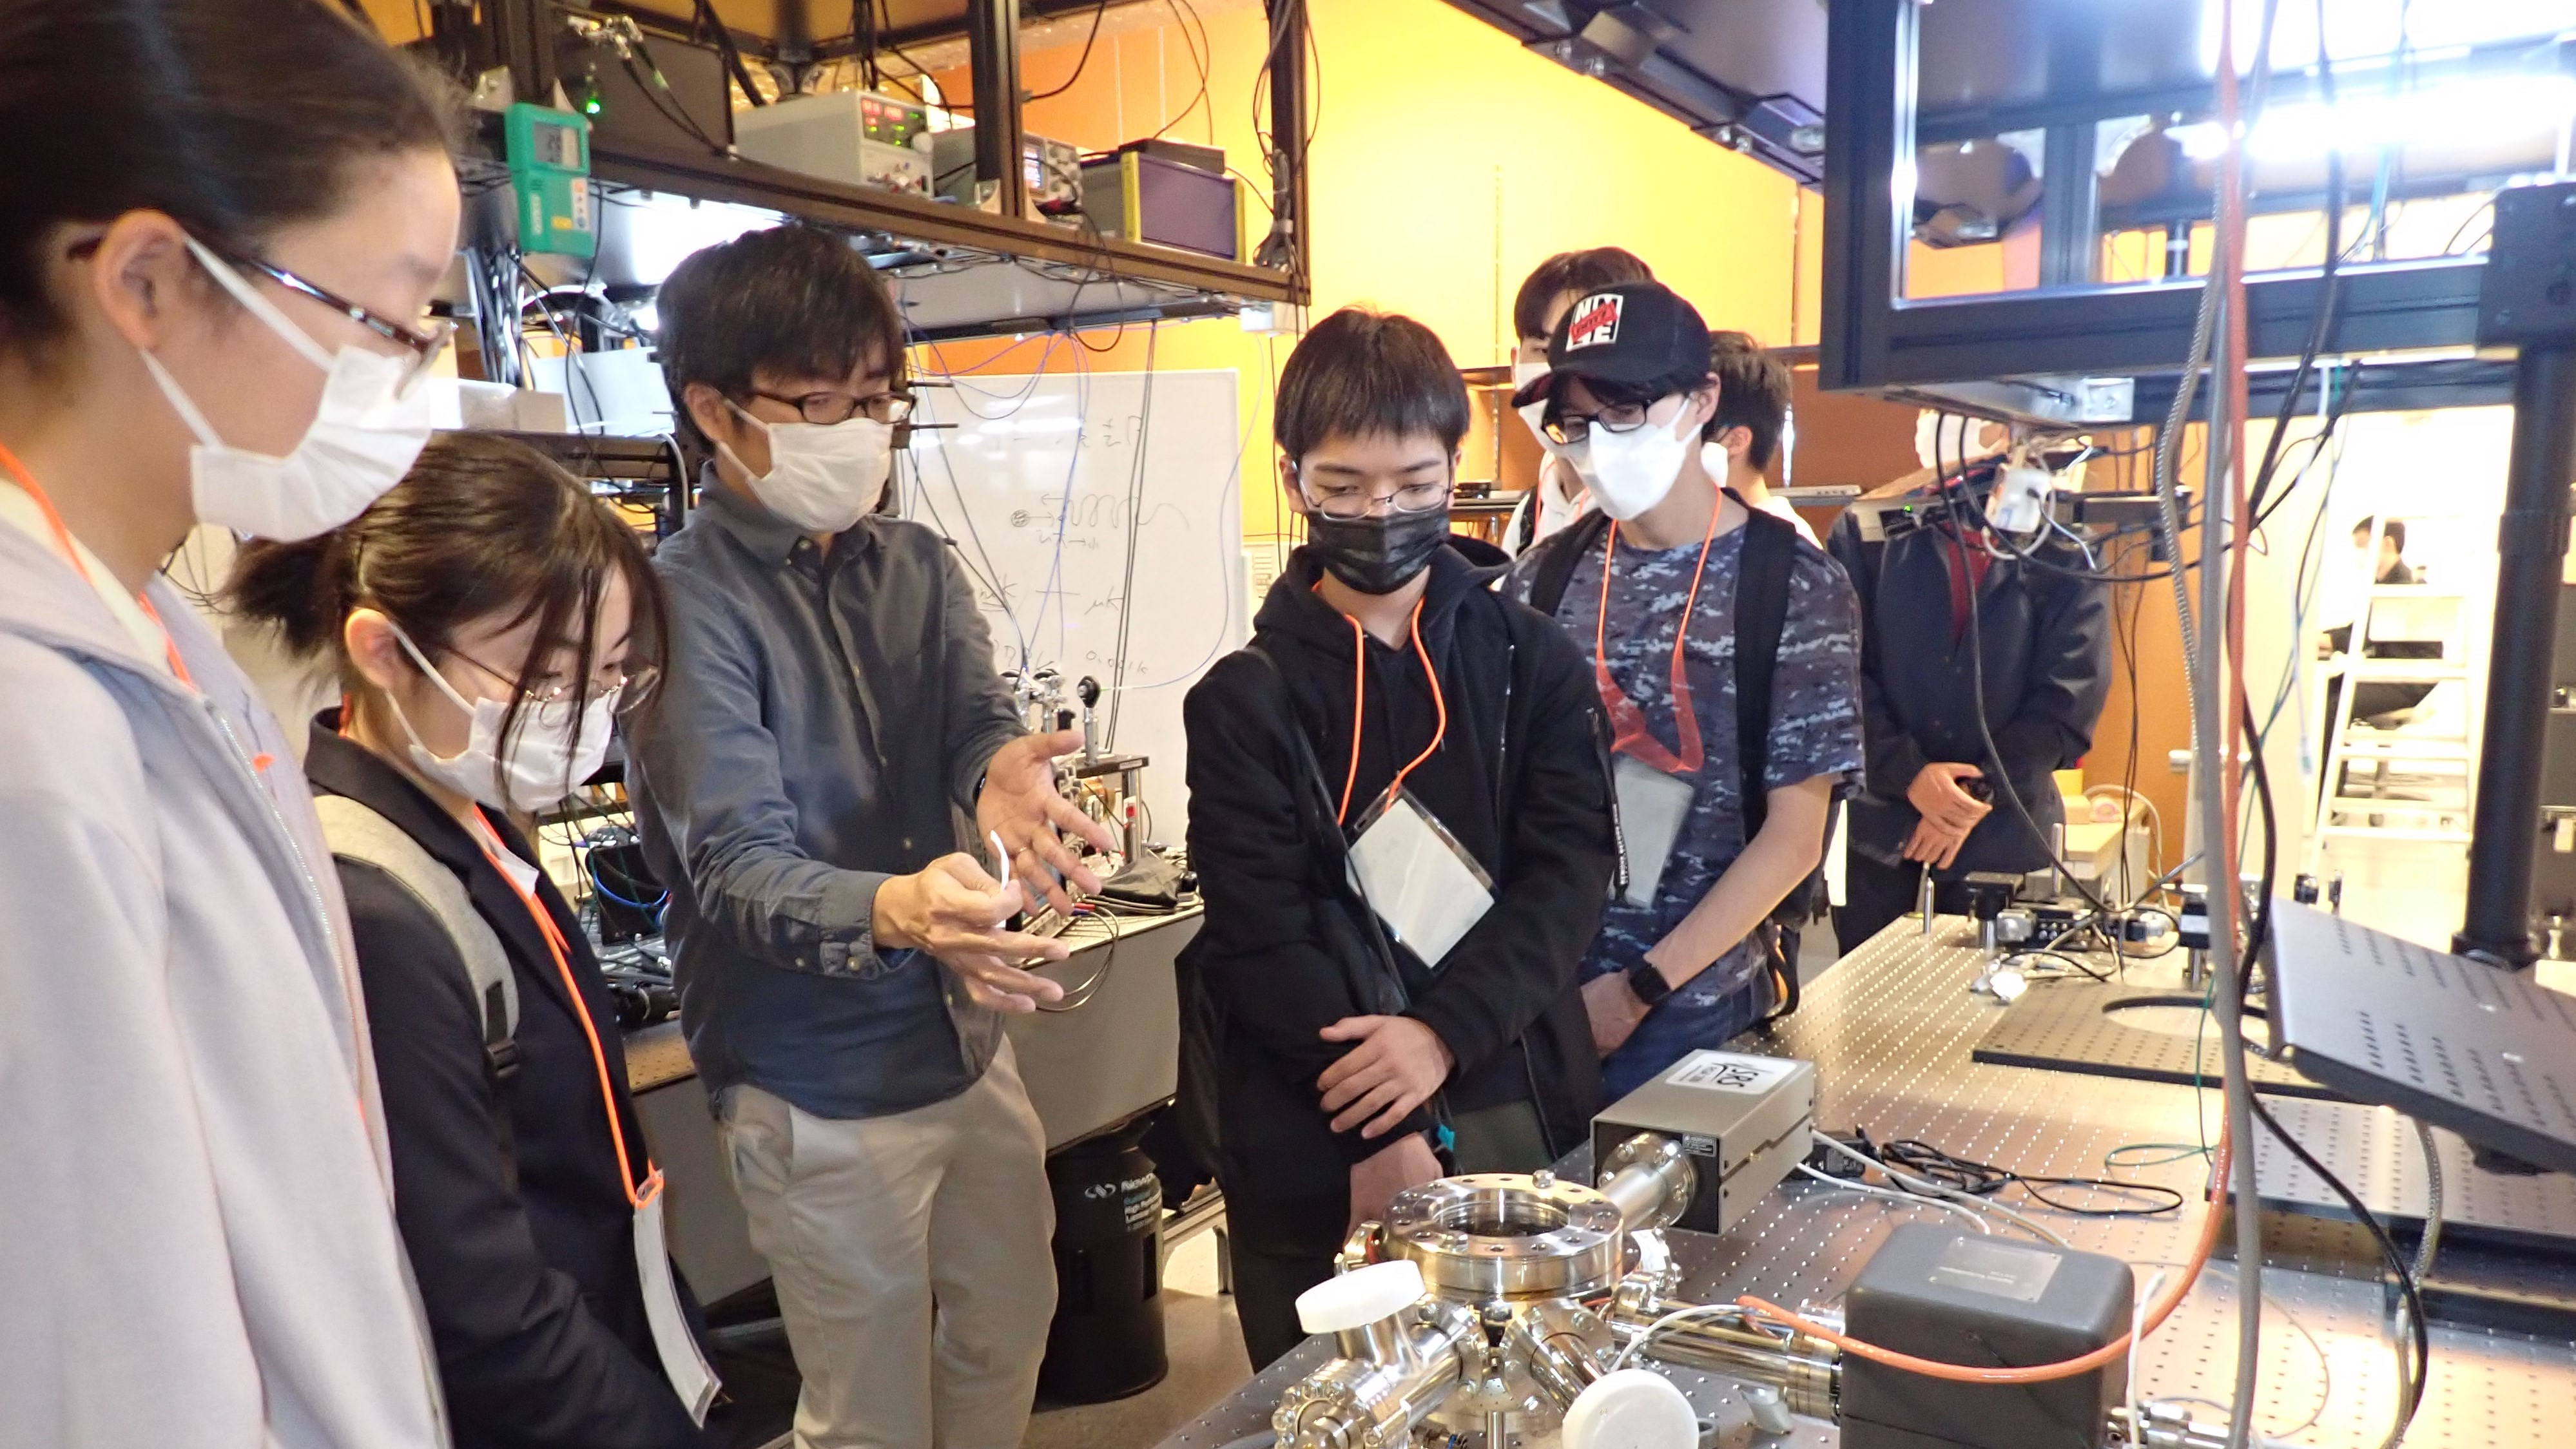 Matsue National College of Technology students visited OIST